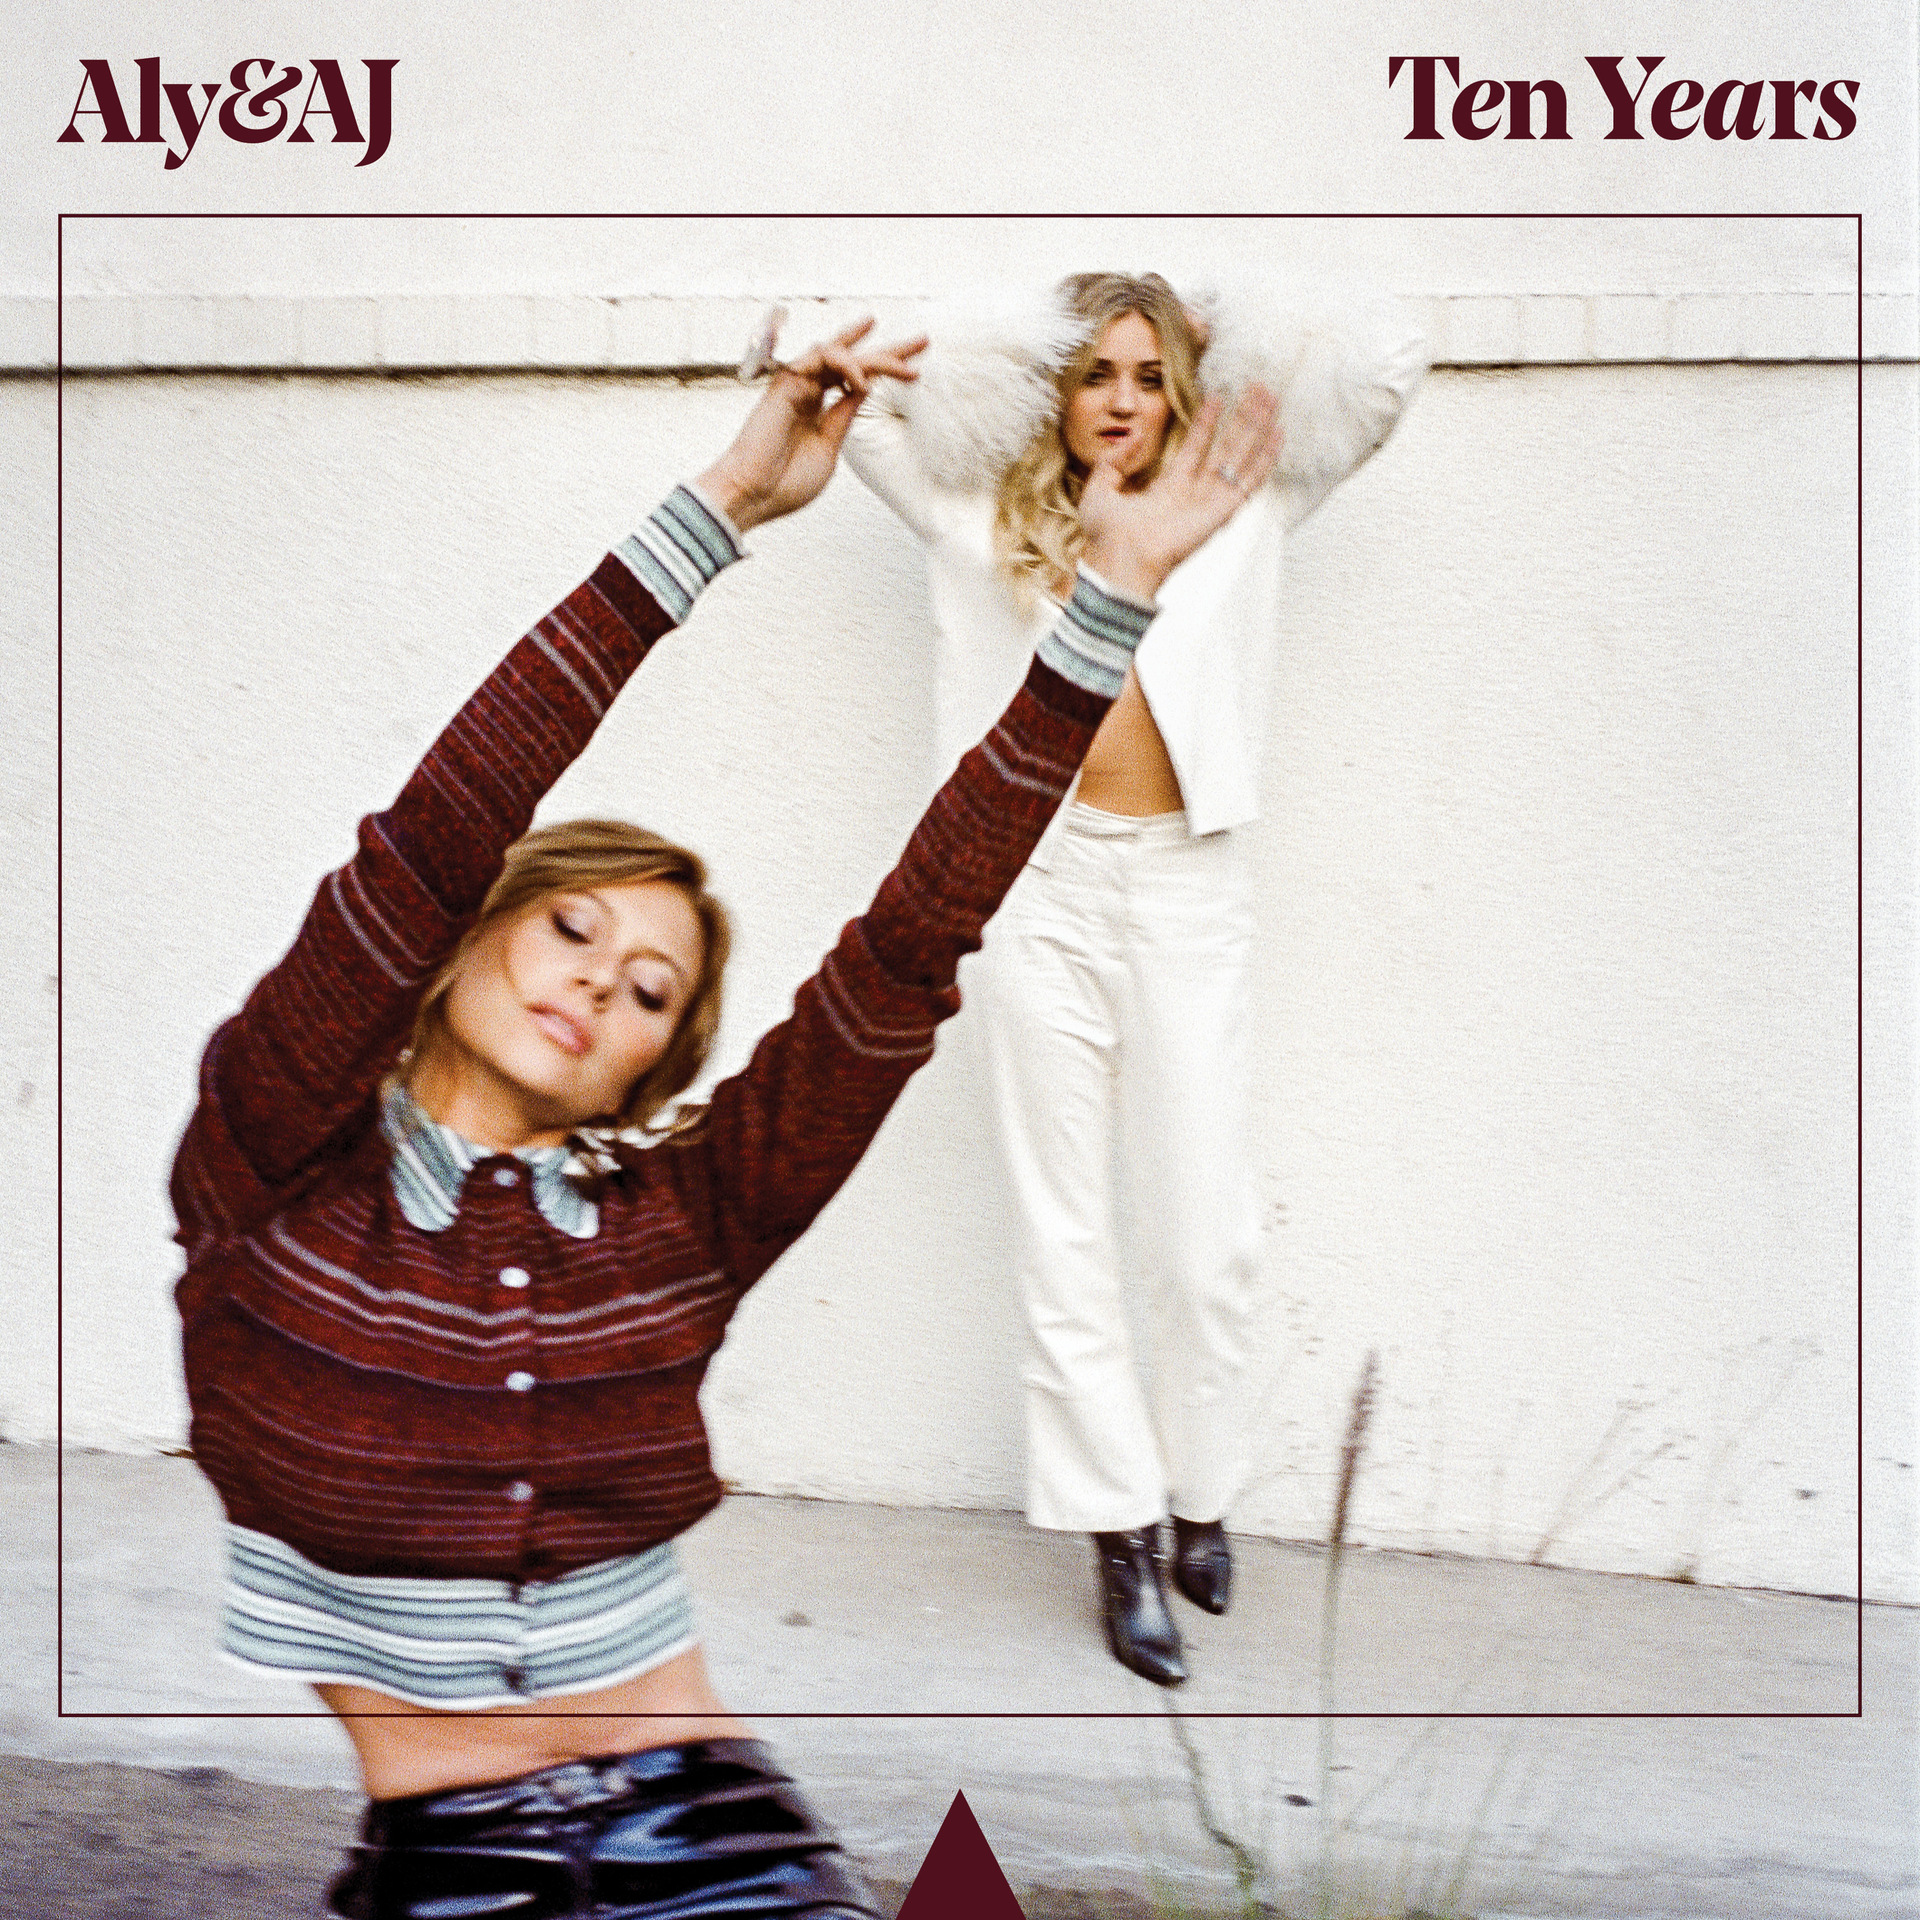 Interview: Aly & AJ Just Want to Sell Out Shows